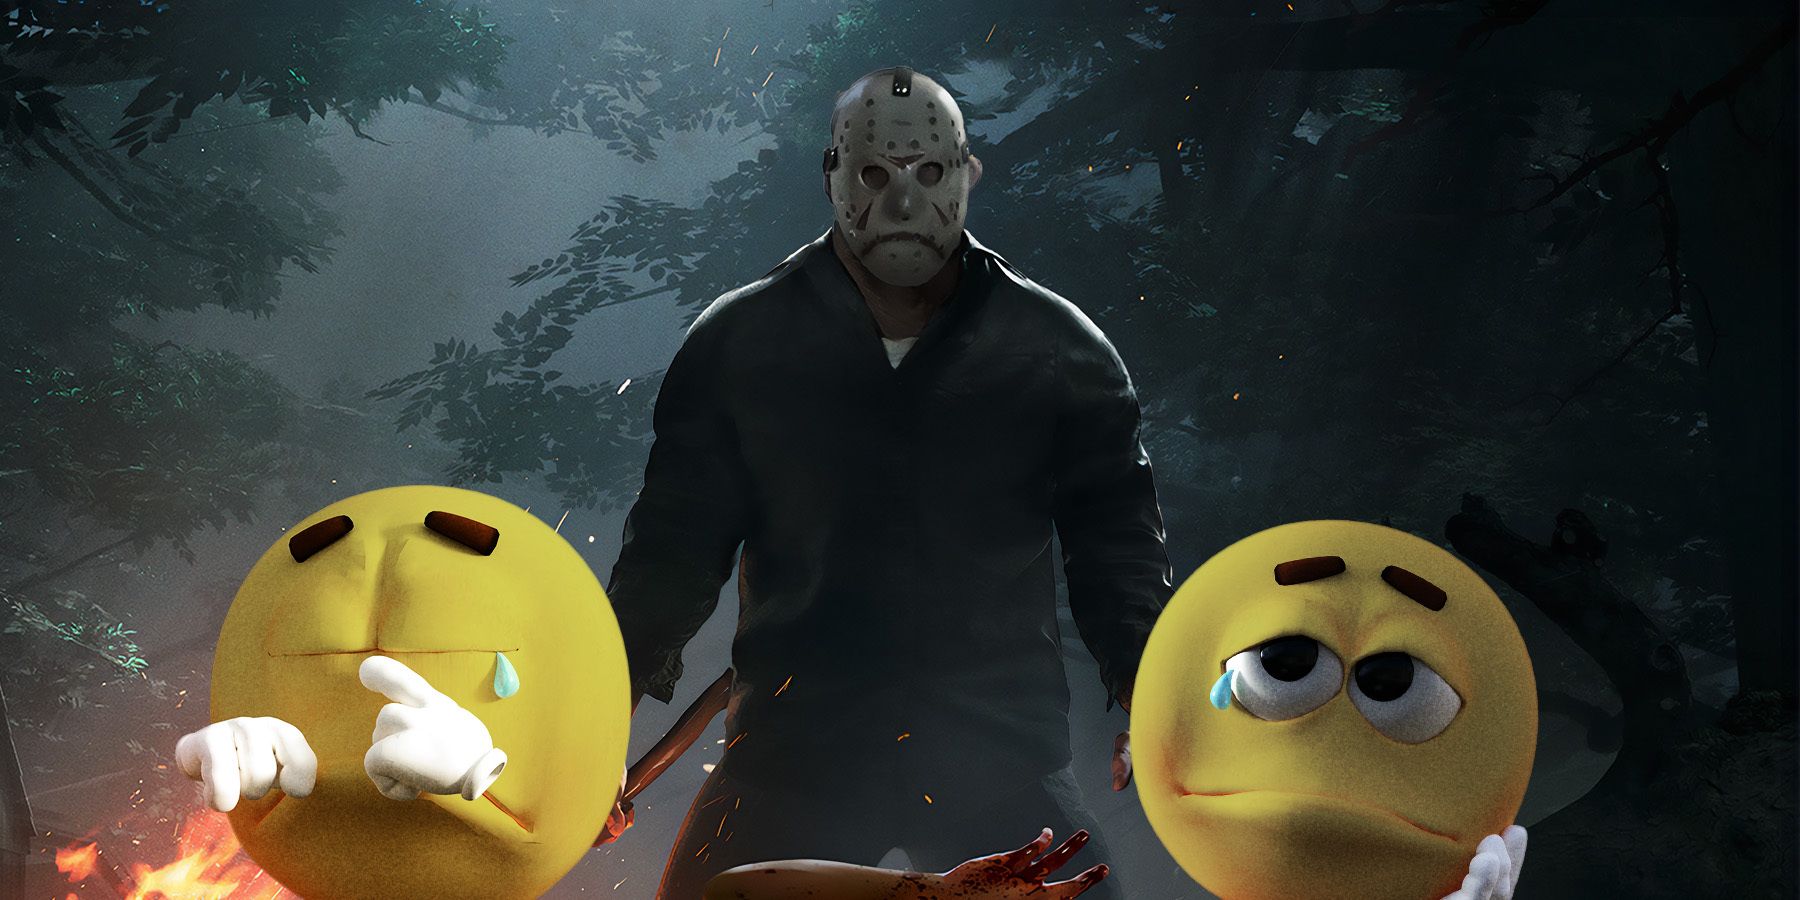 Friday the 13th: Killer Puzzle to be delisted on January 23rd – Delisted  Games